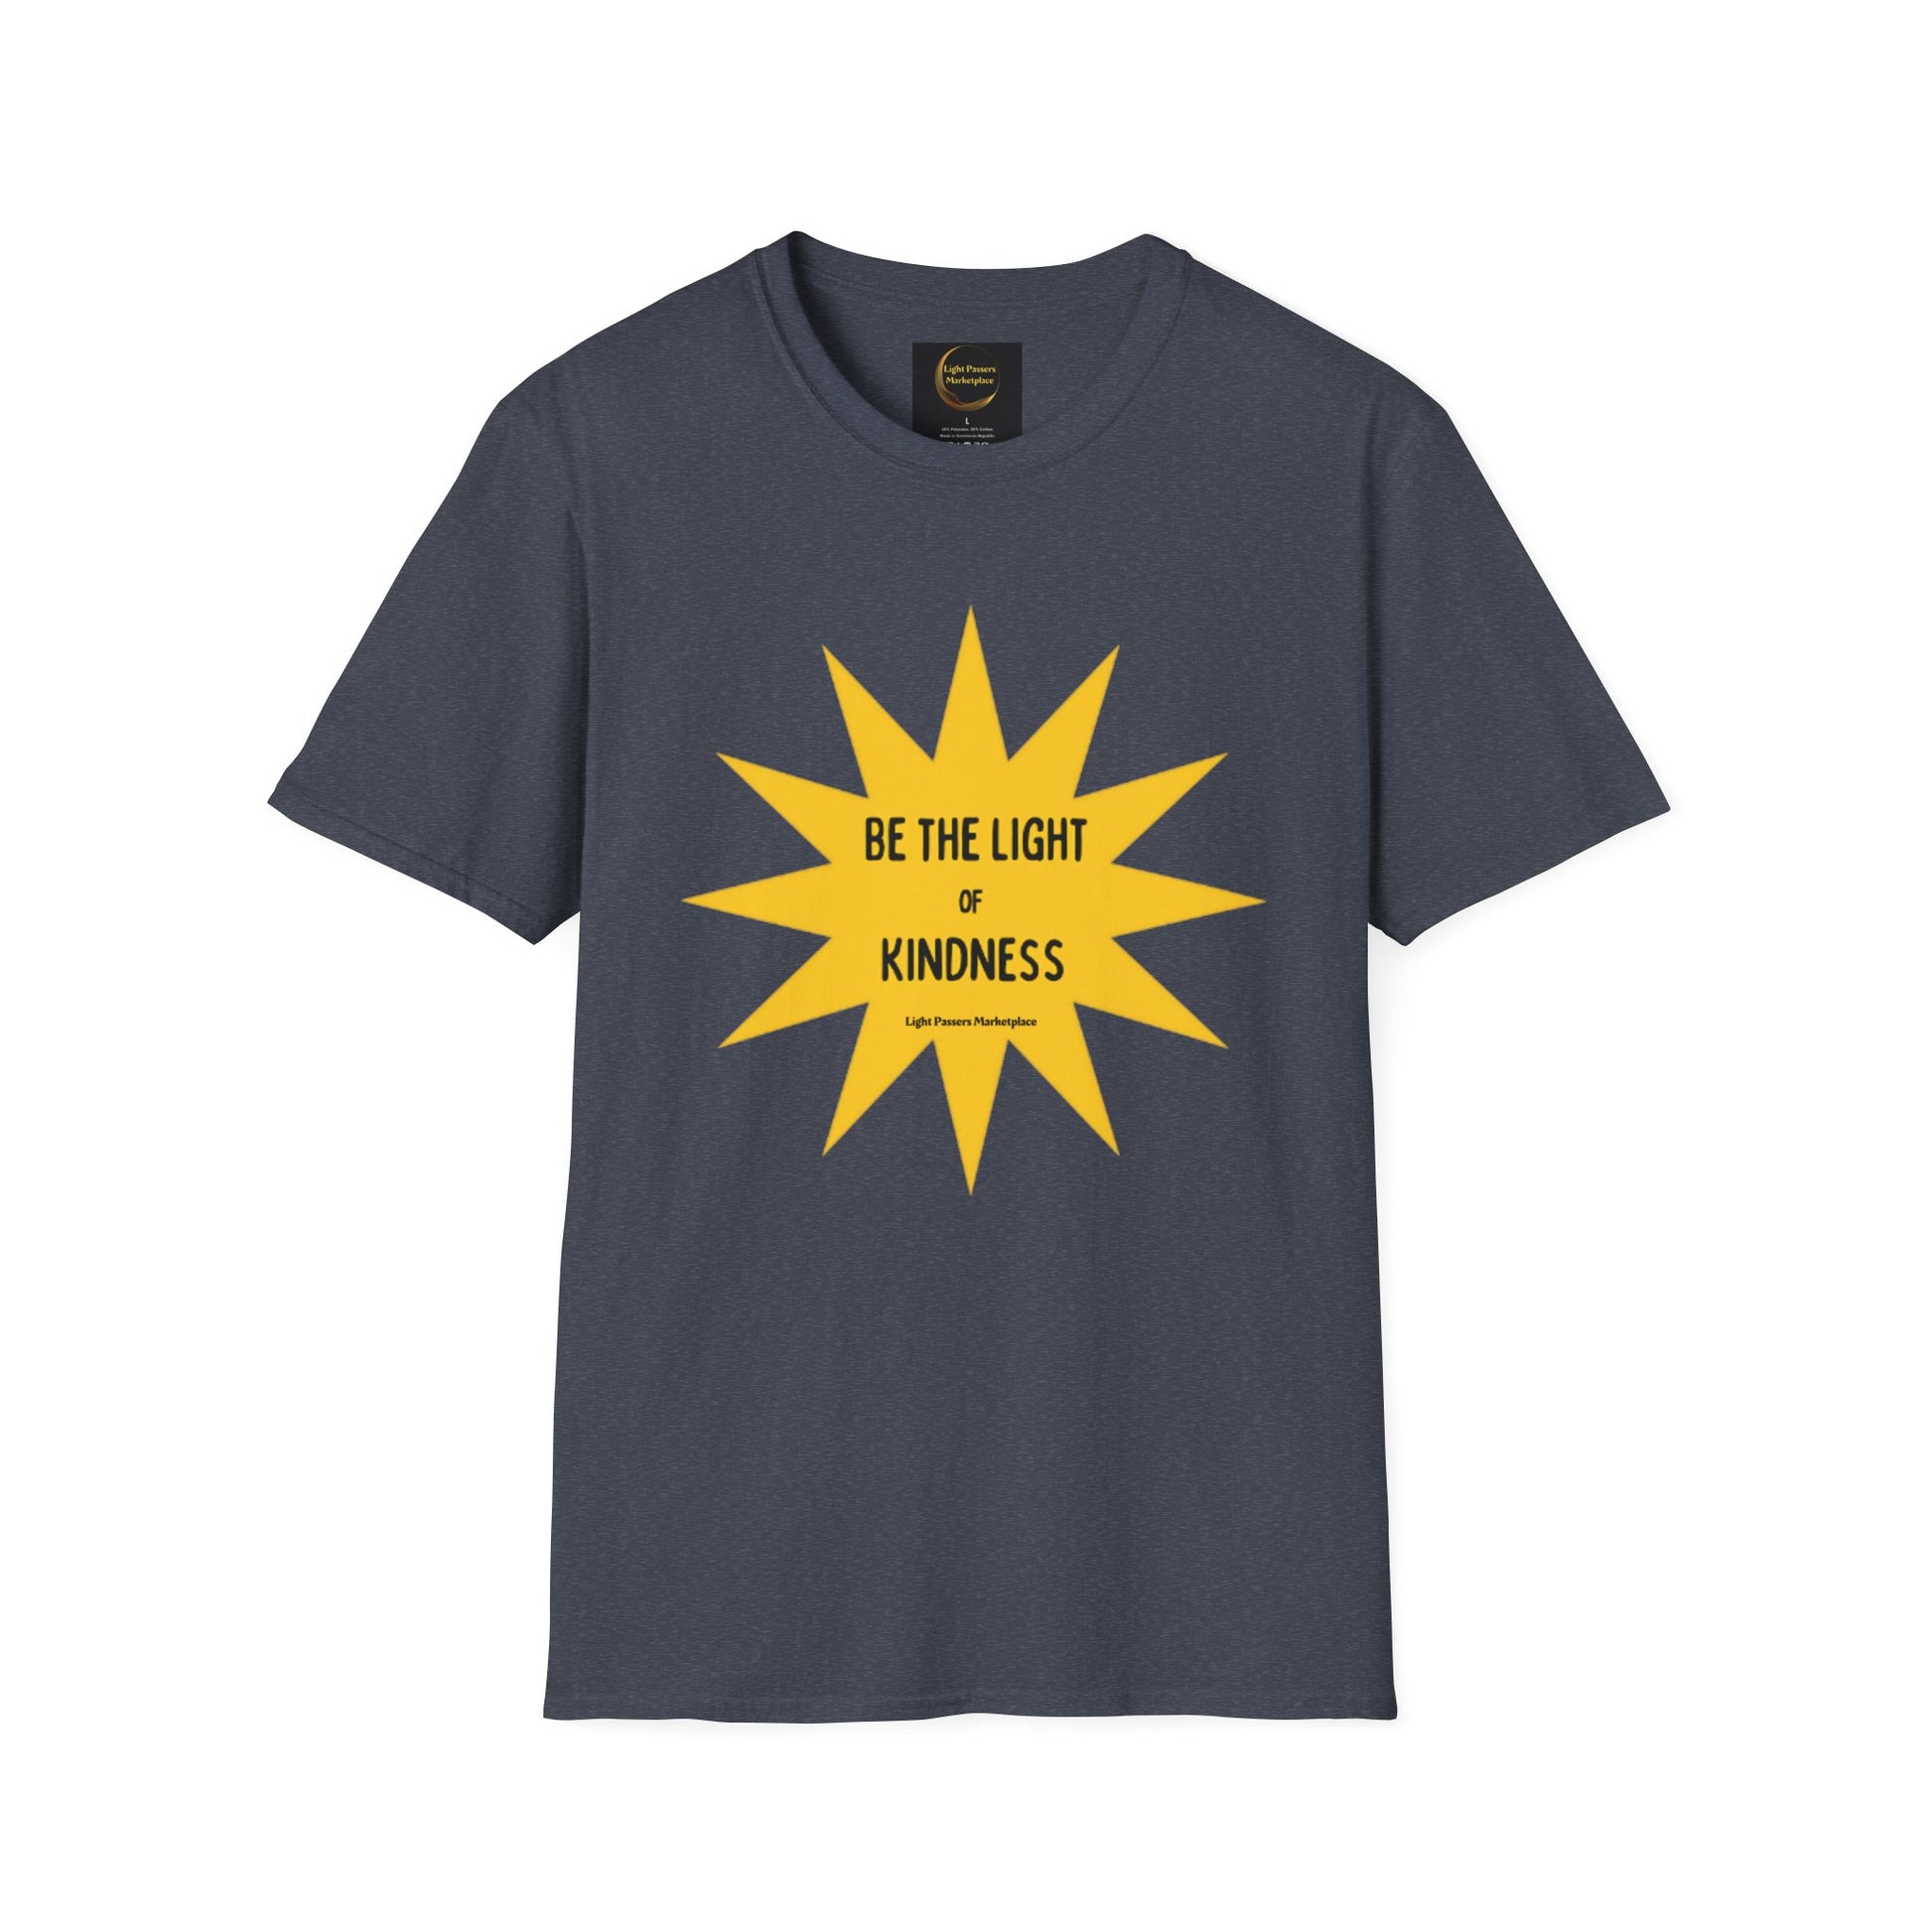 Unisex Be the Light of Kindness T-shirt featuring a yellow star design. Heavy cotton tee with smooth surface for vivid printing, no side seams, and tape on shoulders for durability.